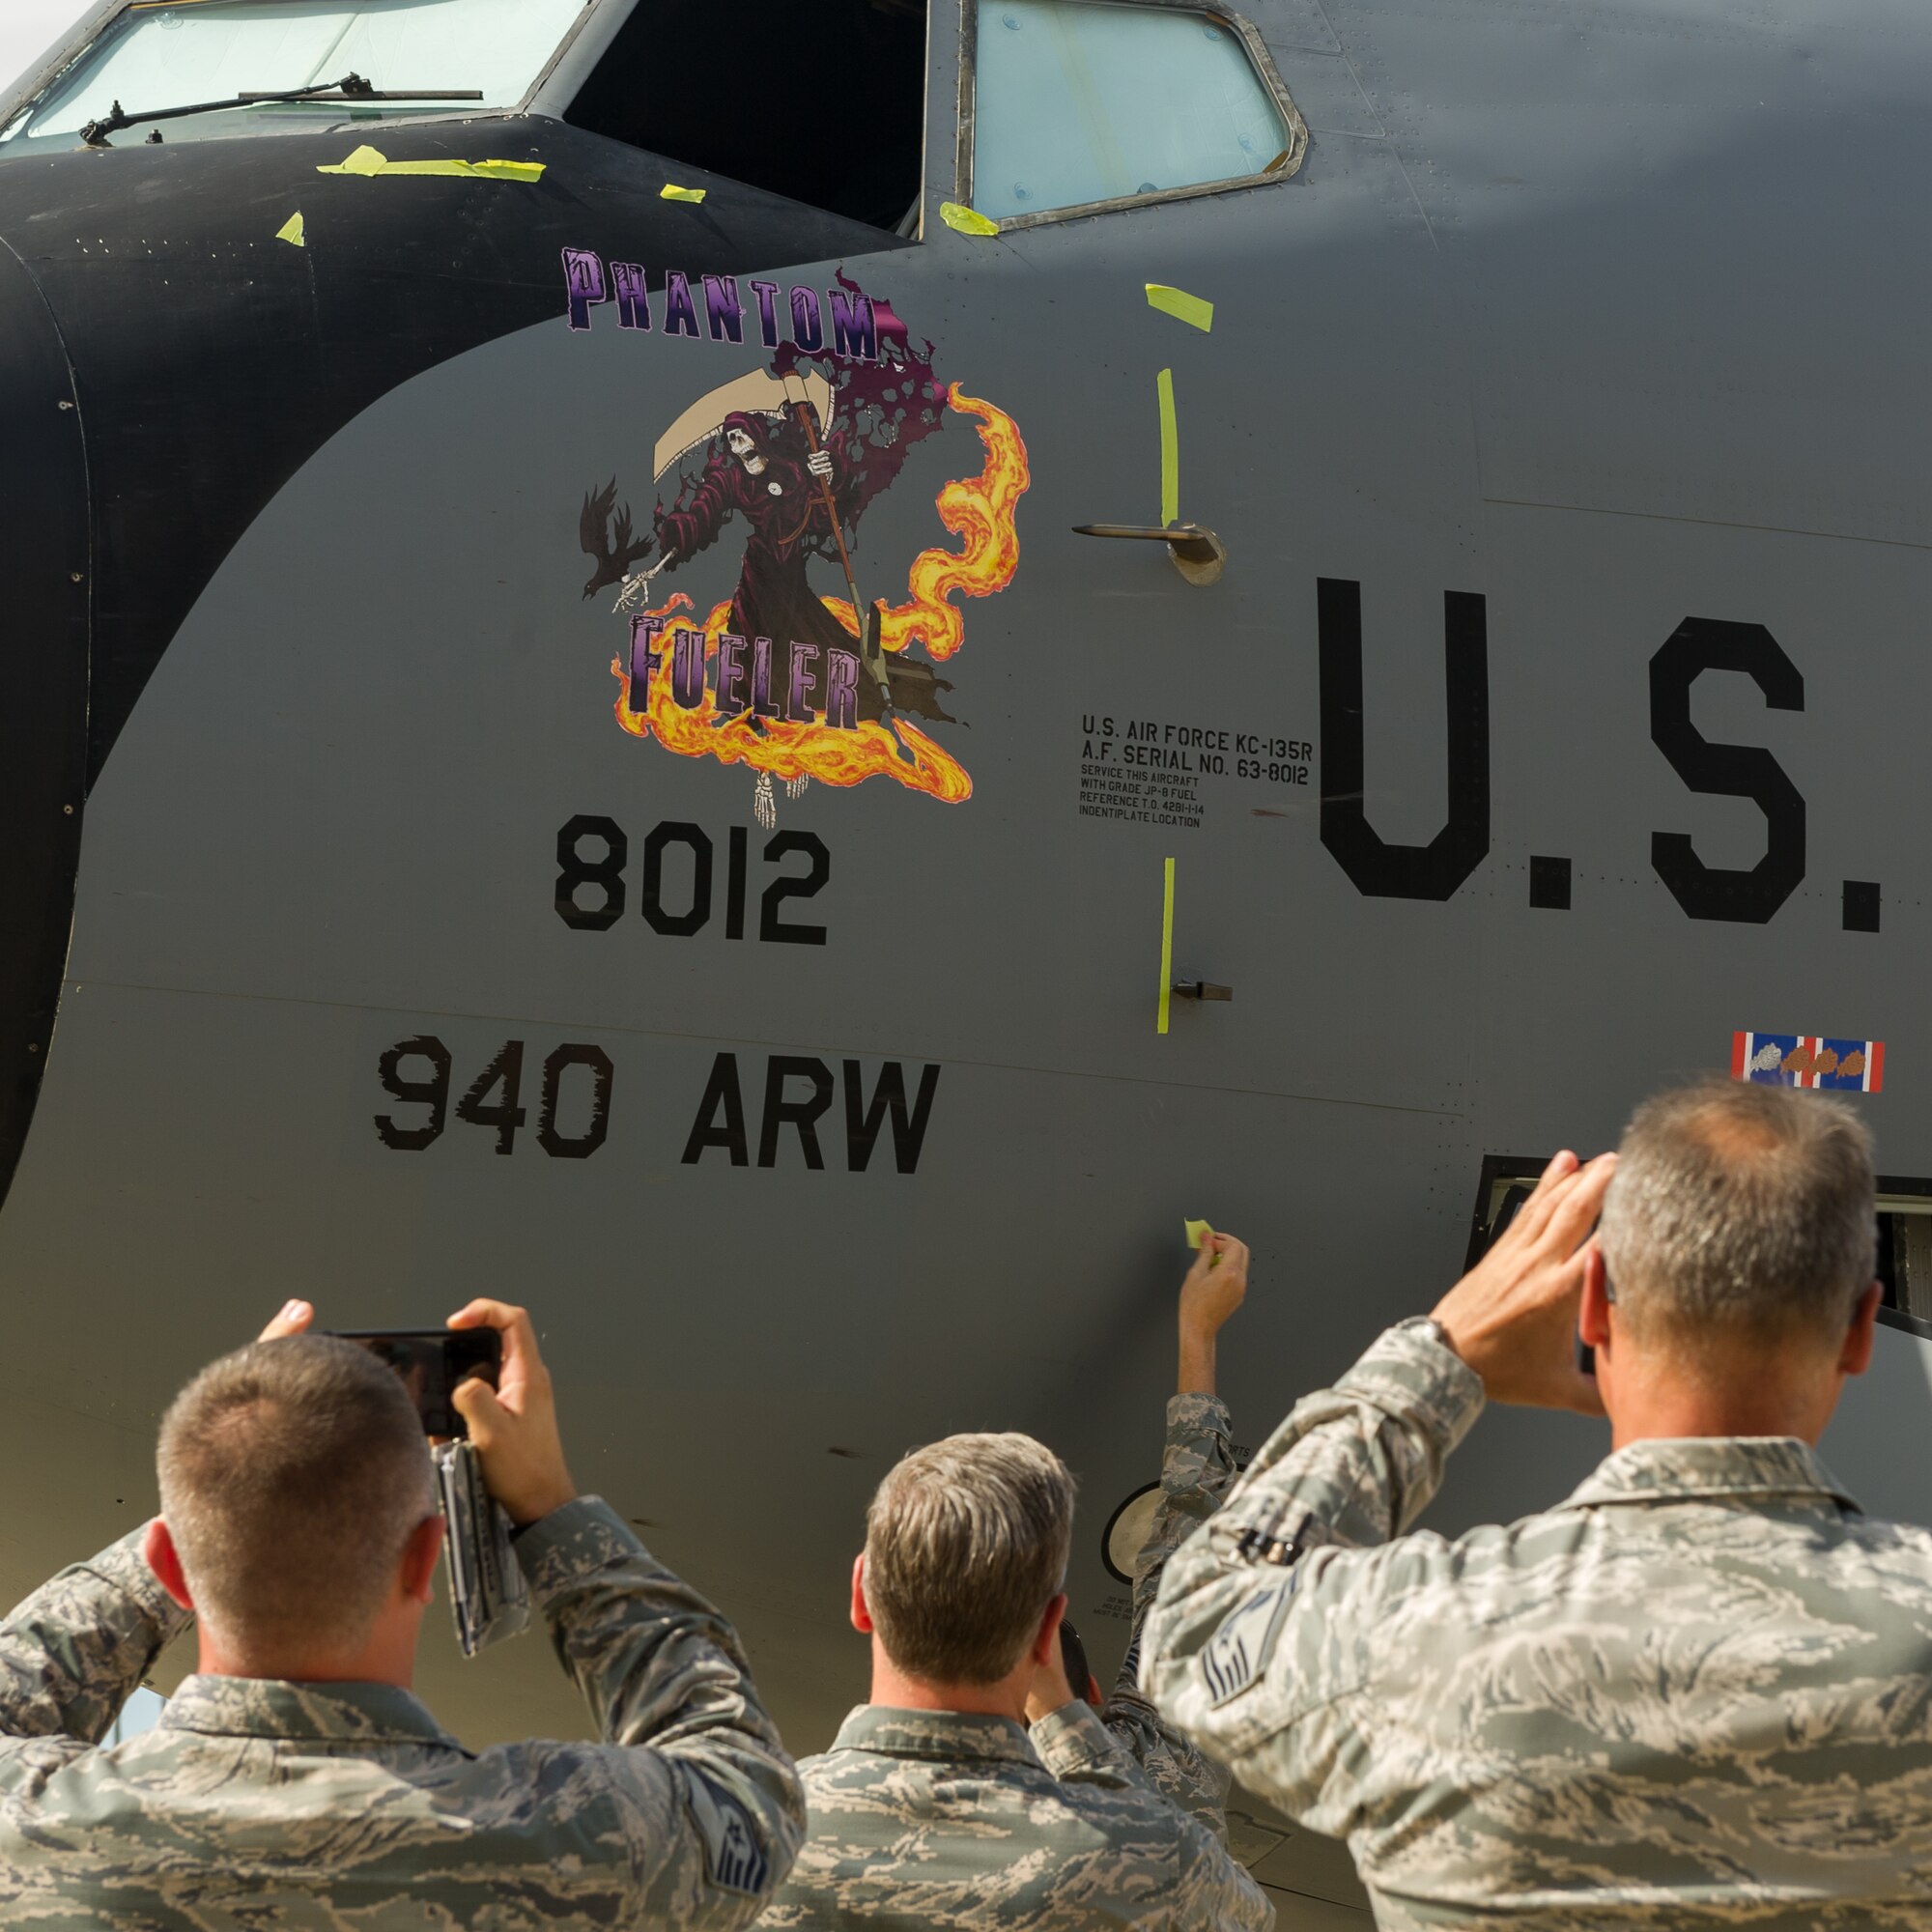 Photo opportunity for the reservist airmem to get close-up photos of nose art.